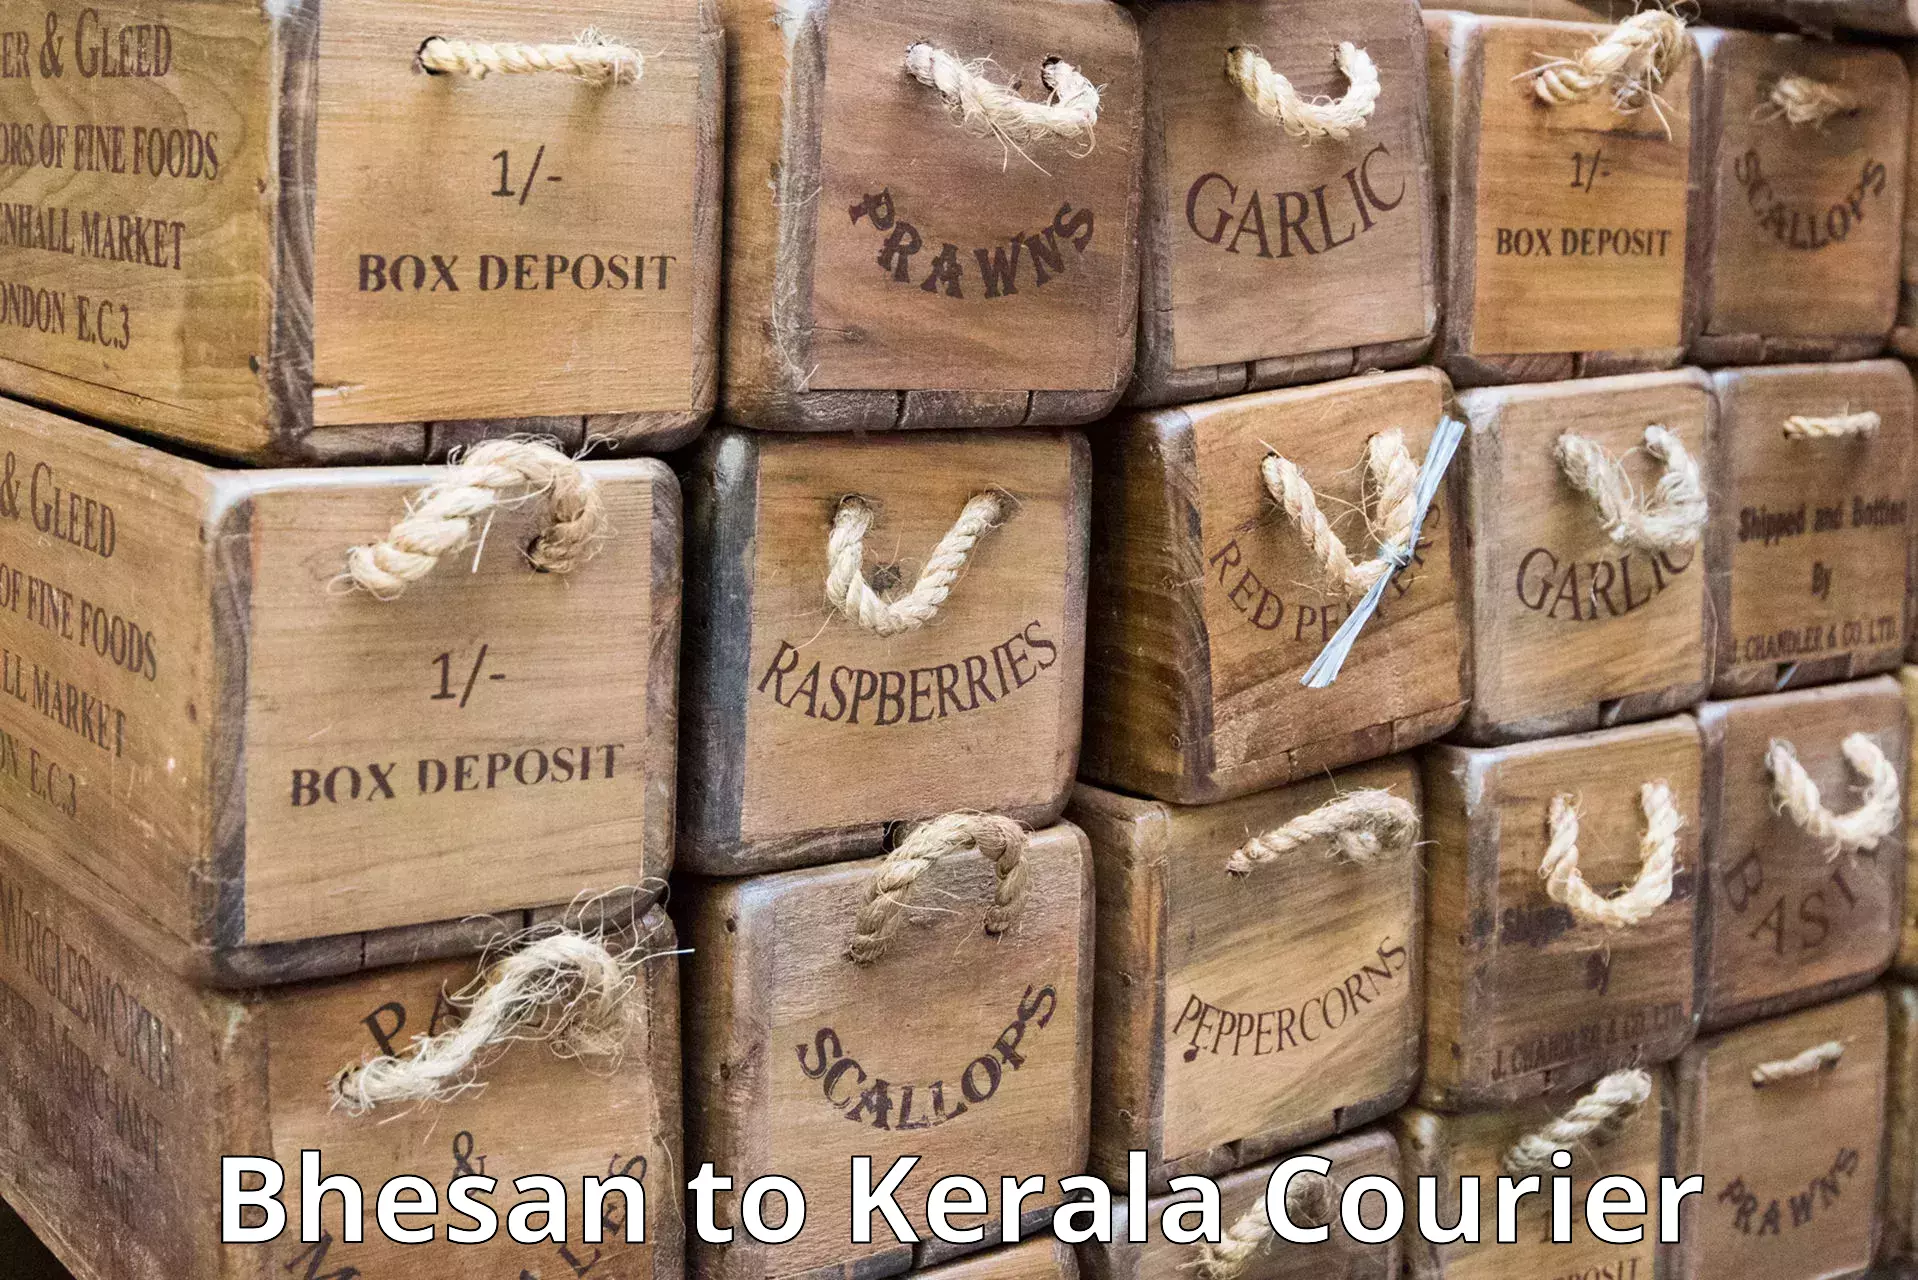 Global courier networks Bhesan to Kerala